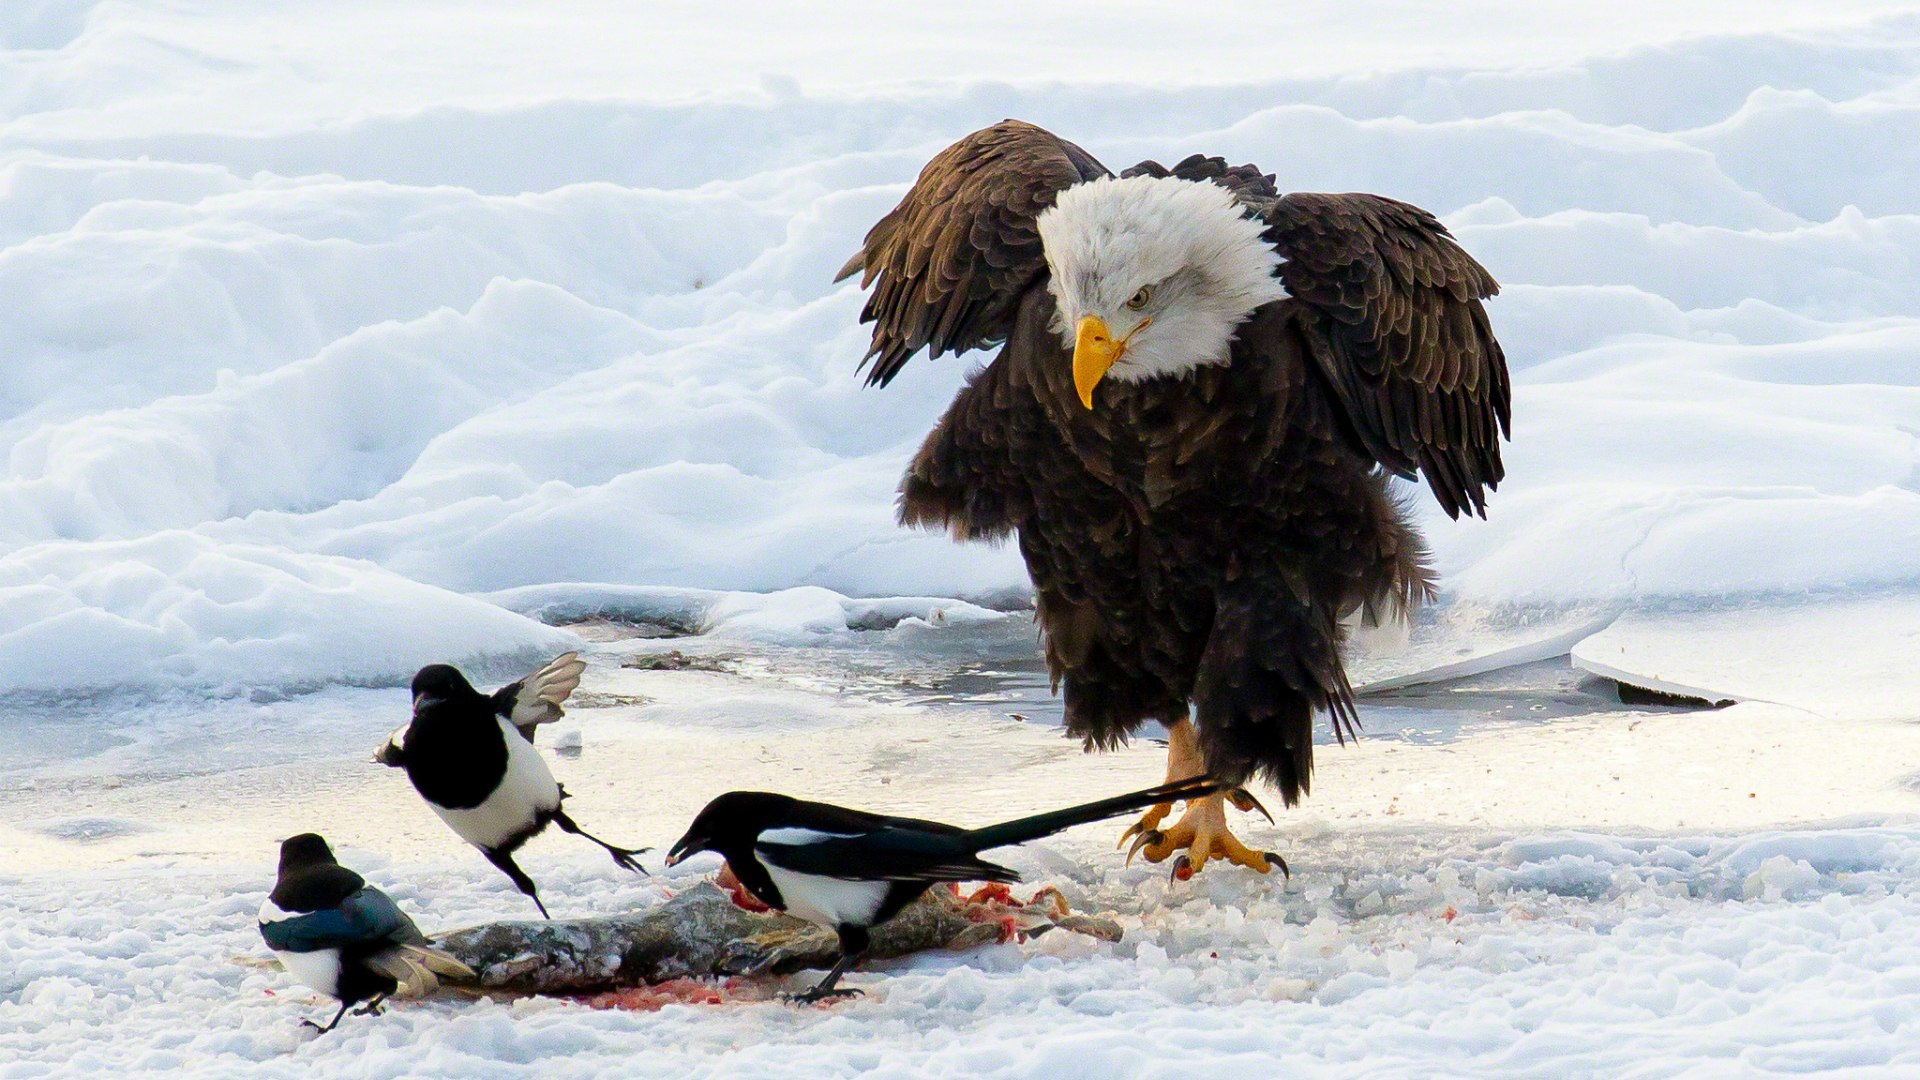 Bald eagle and magpie wallpapers and images